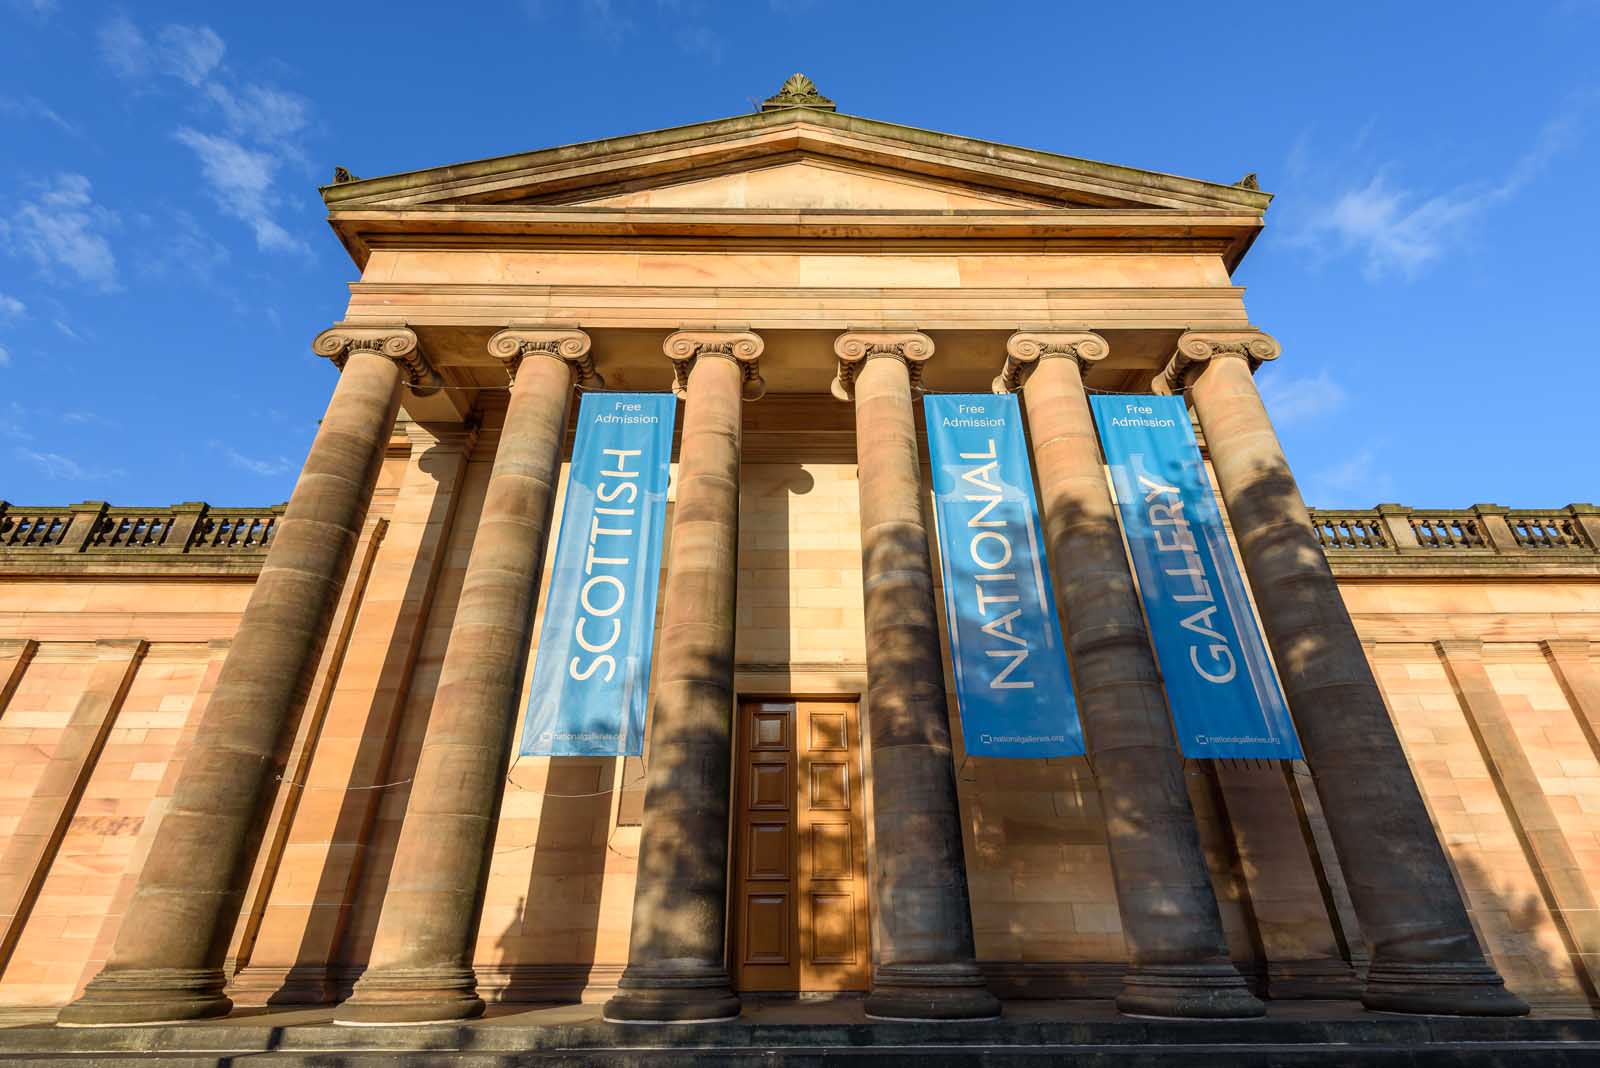 Top things to do in Edinburgh Scottish National Gallery